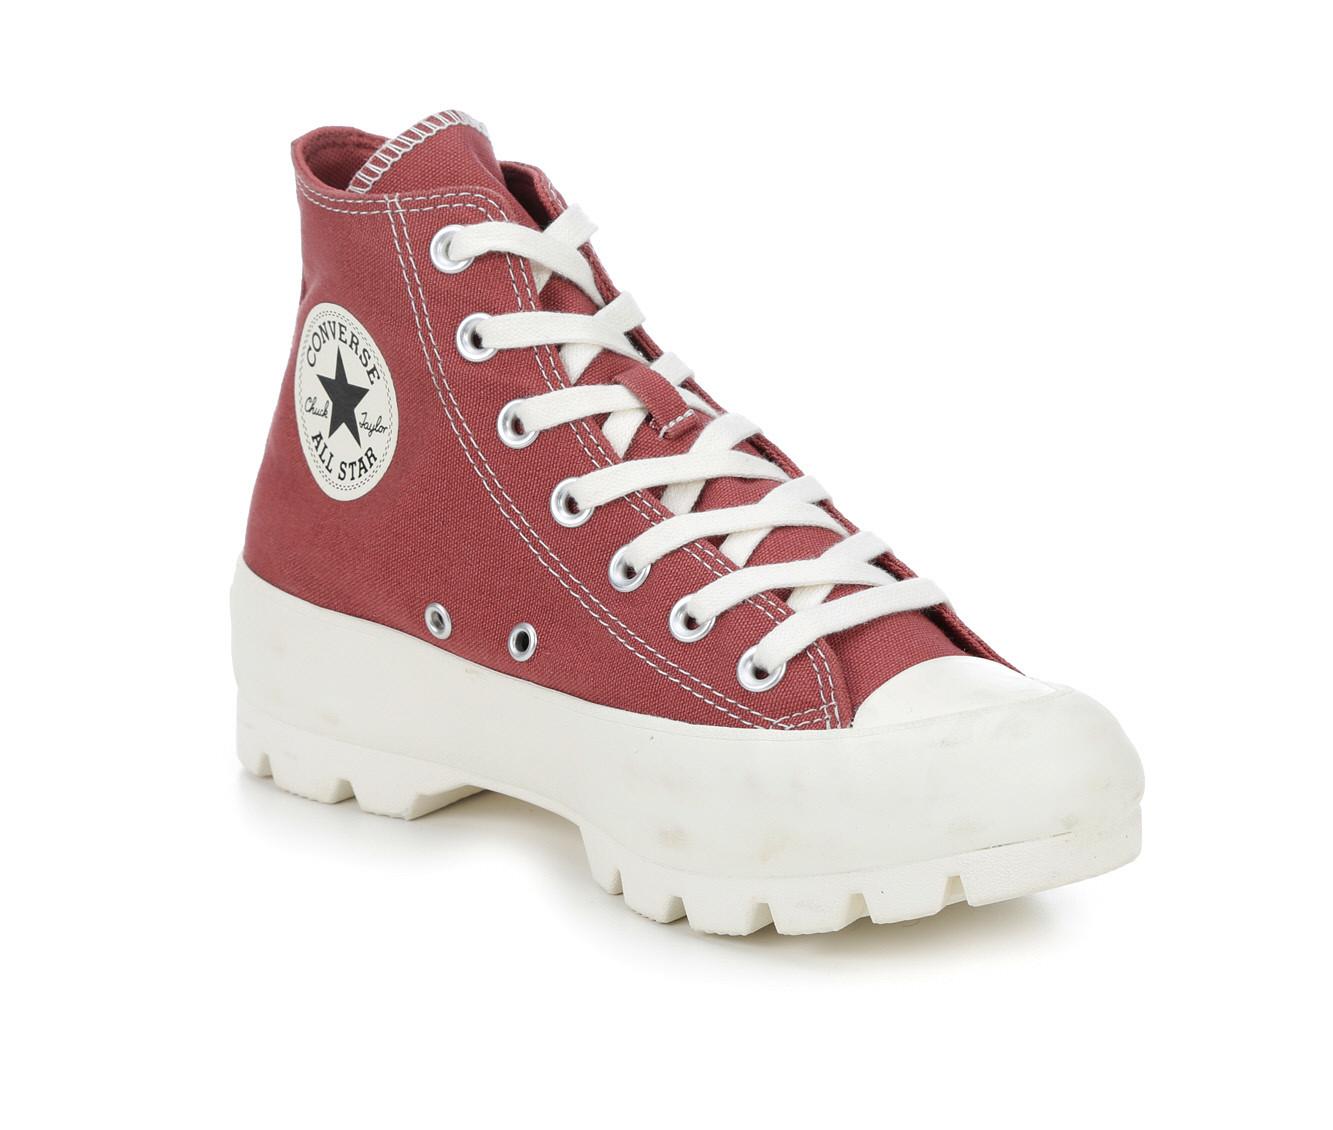 Women's Converse Chuck Taylor All Star Lugged Platform Sneakers